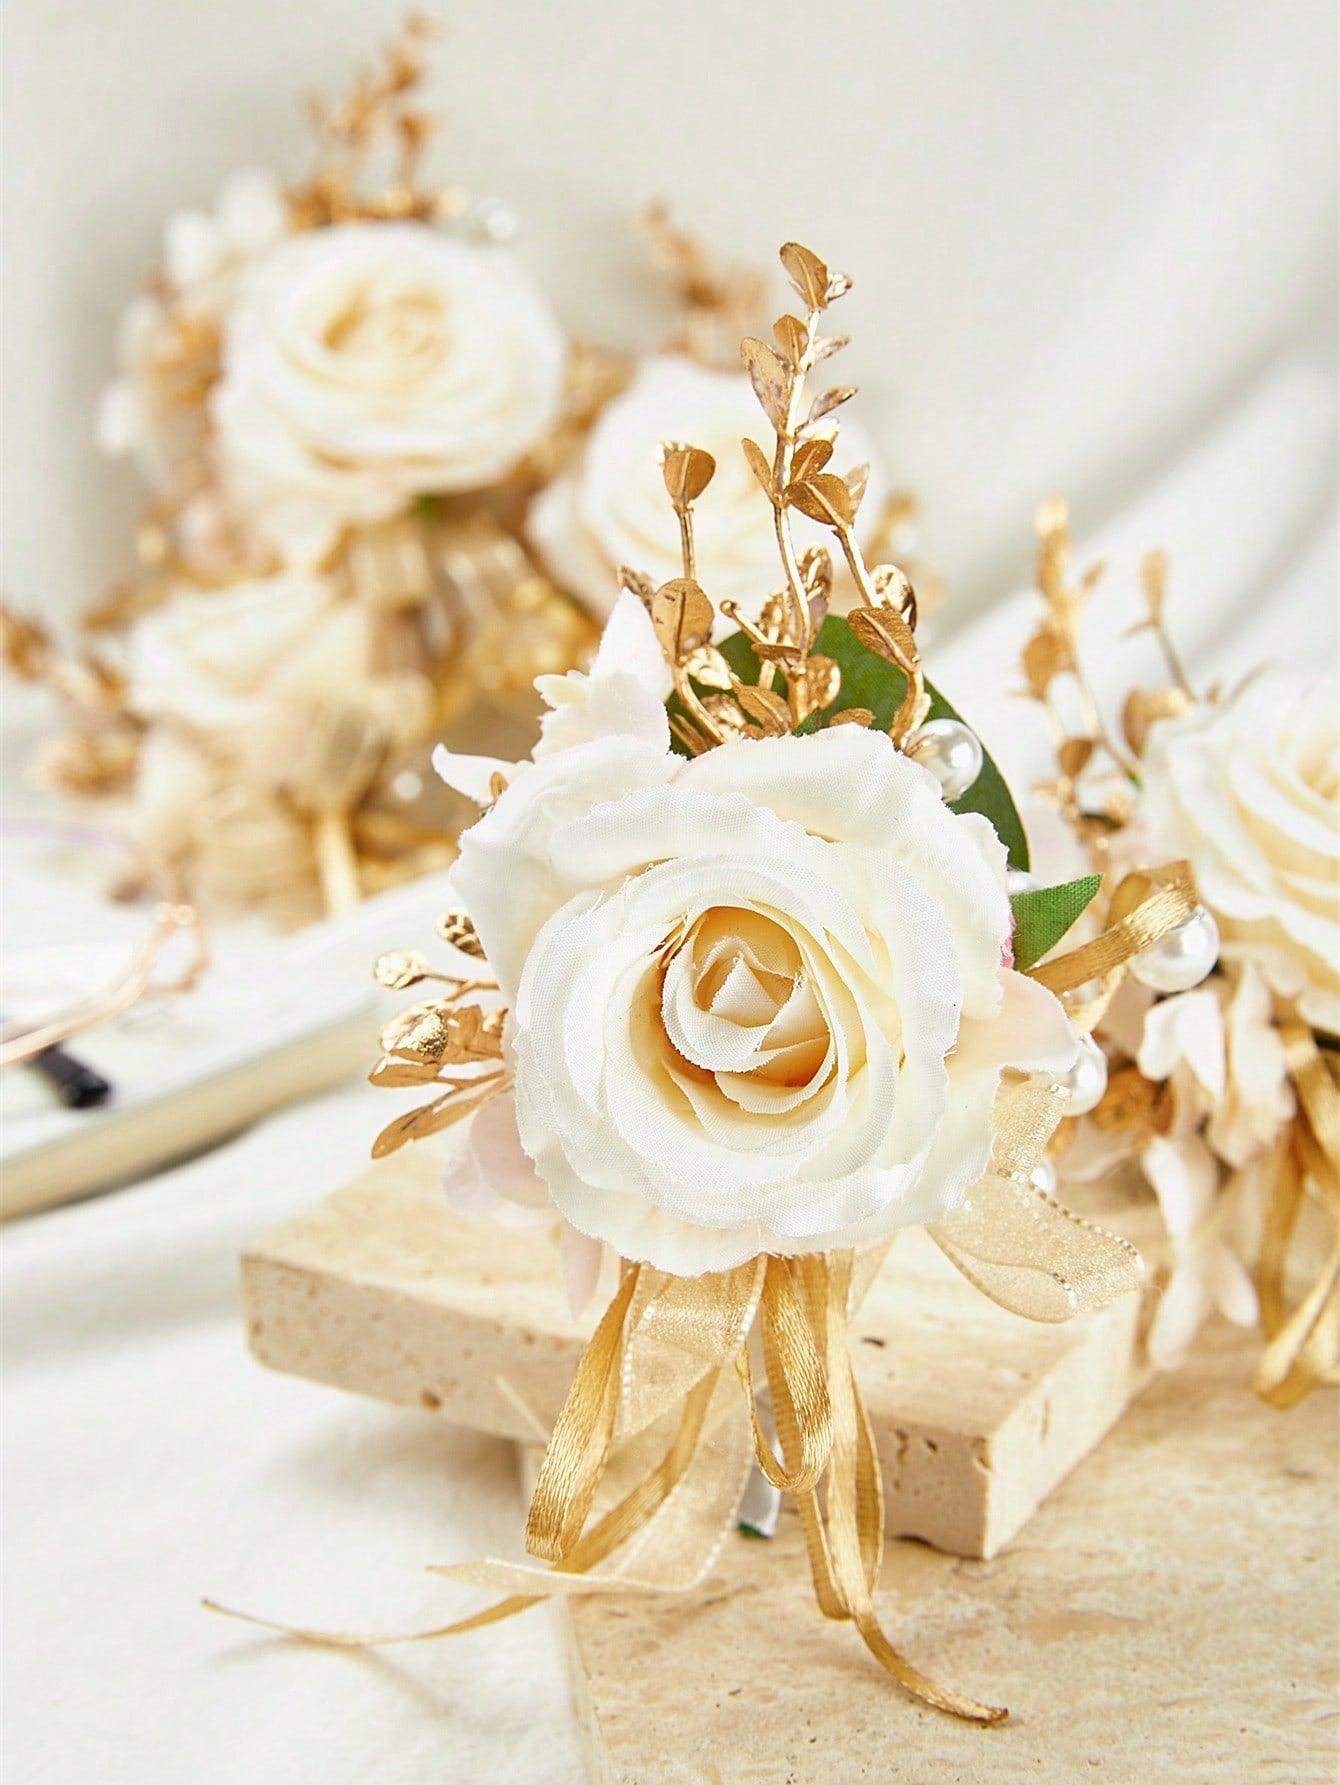 6pcs Flower Decor Boutonniere - If you say i do